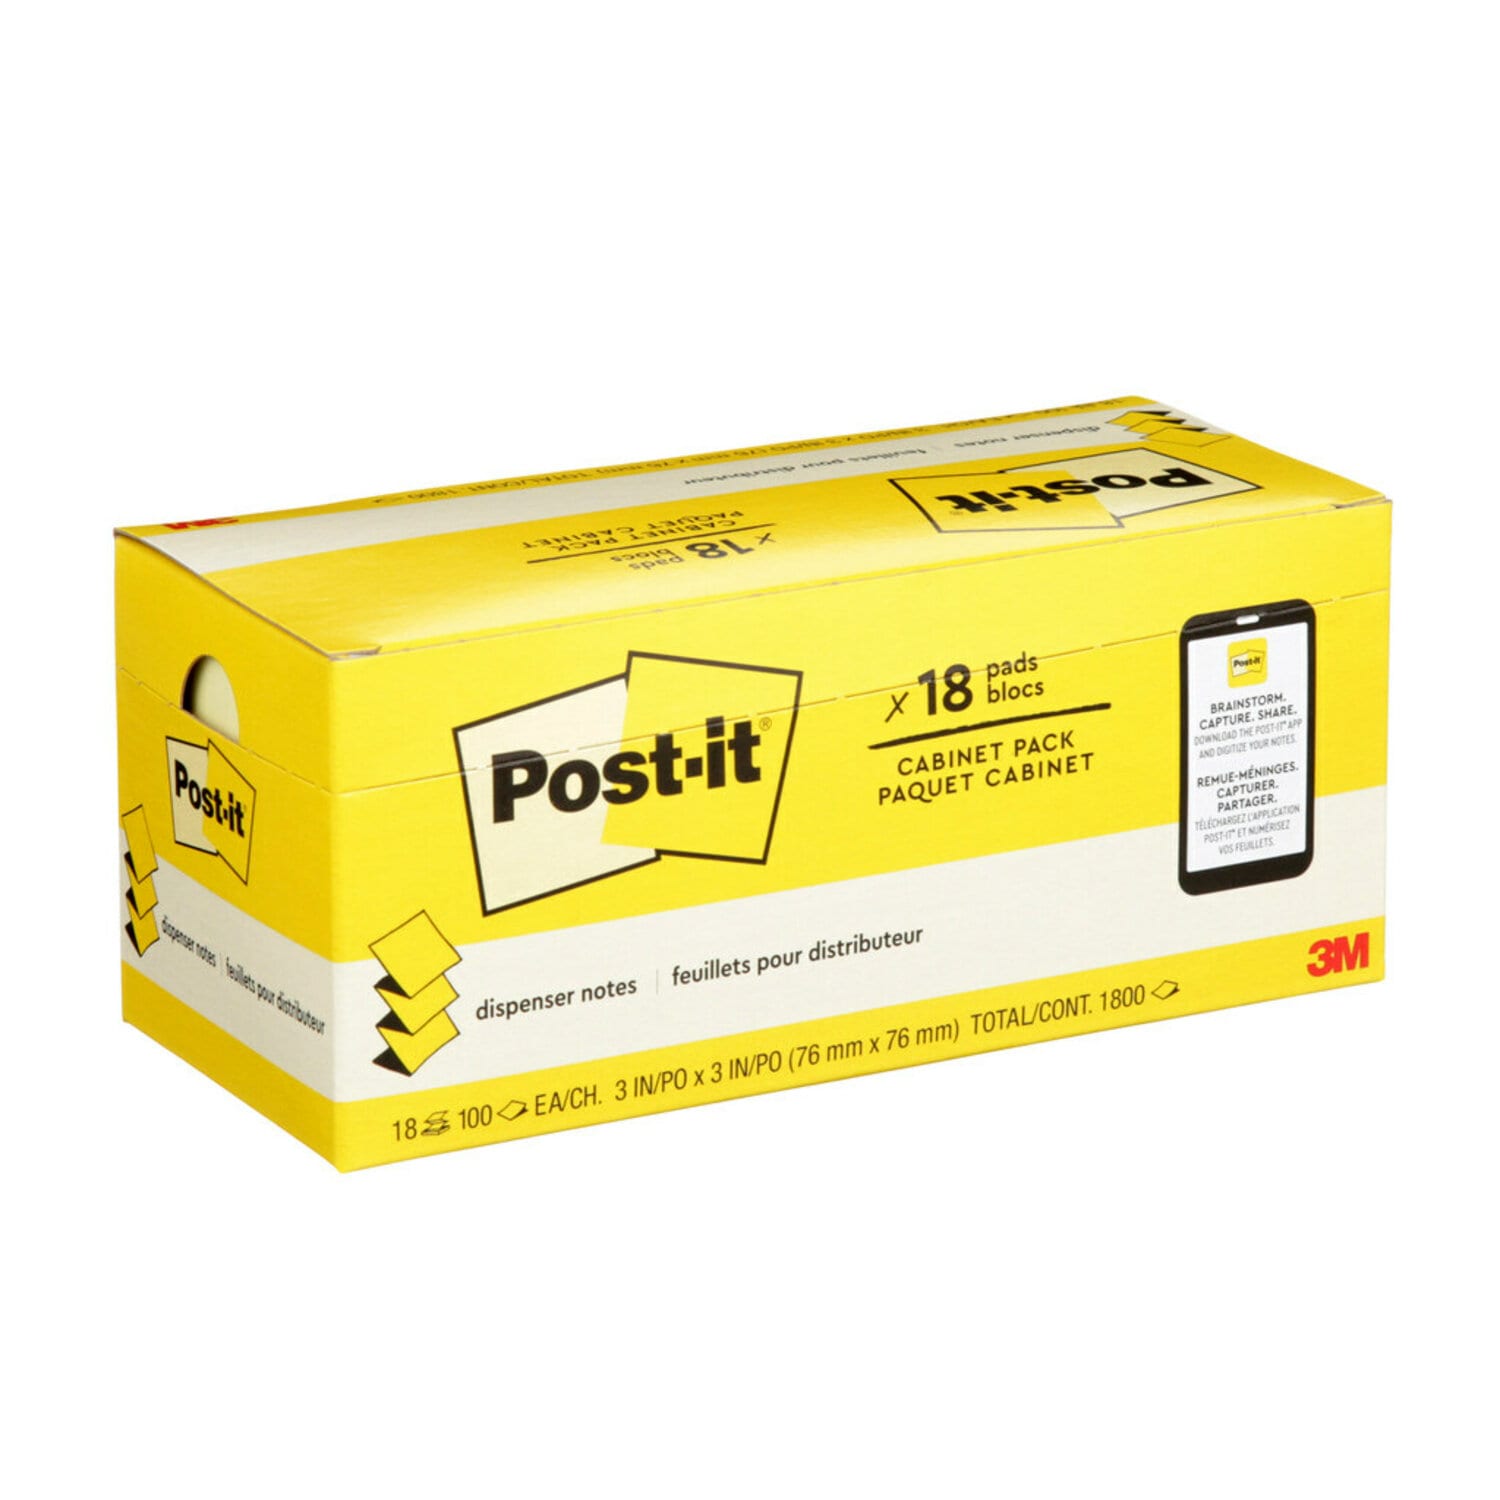 7100249375 - Post-it Dispenser Pop-up Notes R330-18CP, 3 in x 3 in (76 mm x 76 mm), Canary Yellow, 100 sheets/pad, 18 Pad, Cabinet Pack